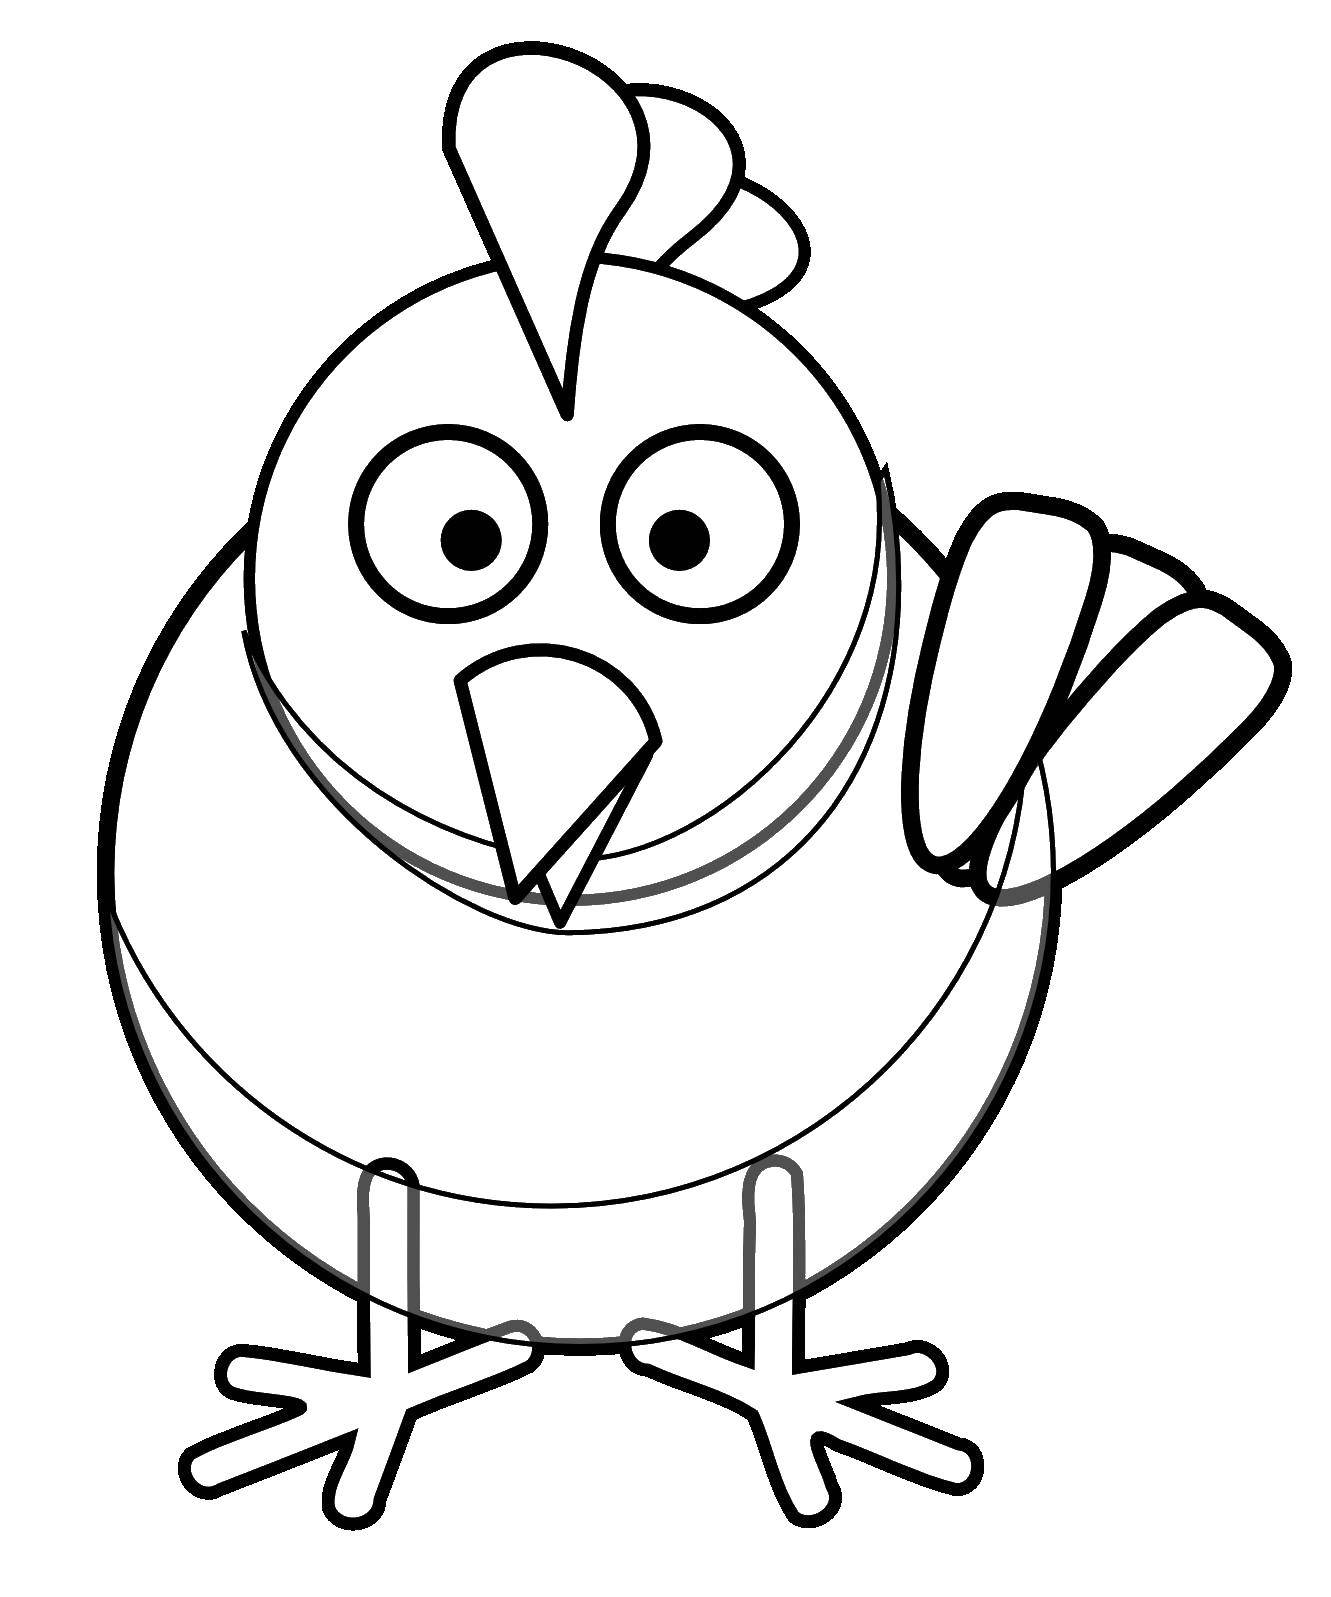 Coloring Draw a chicken. Category The contours for cutting out the birds. Tags:  Chicken, poultry.